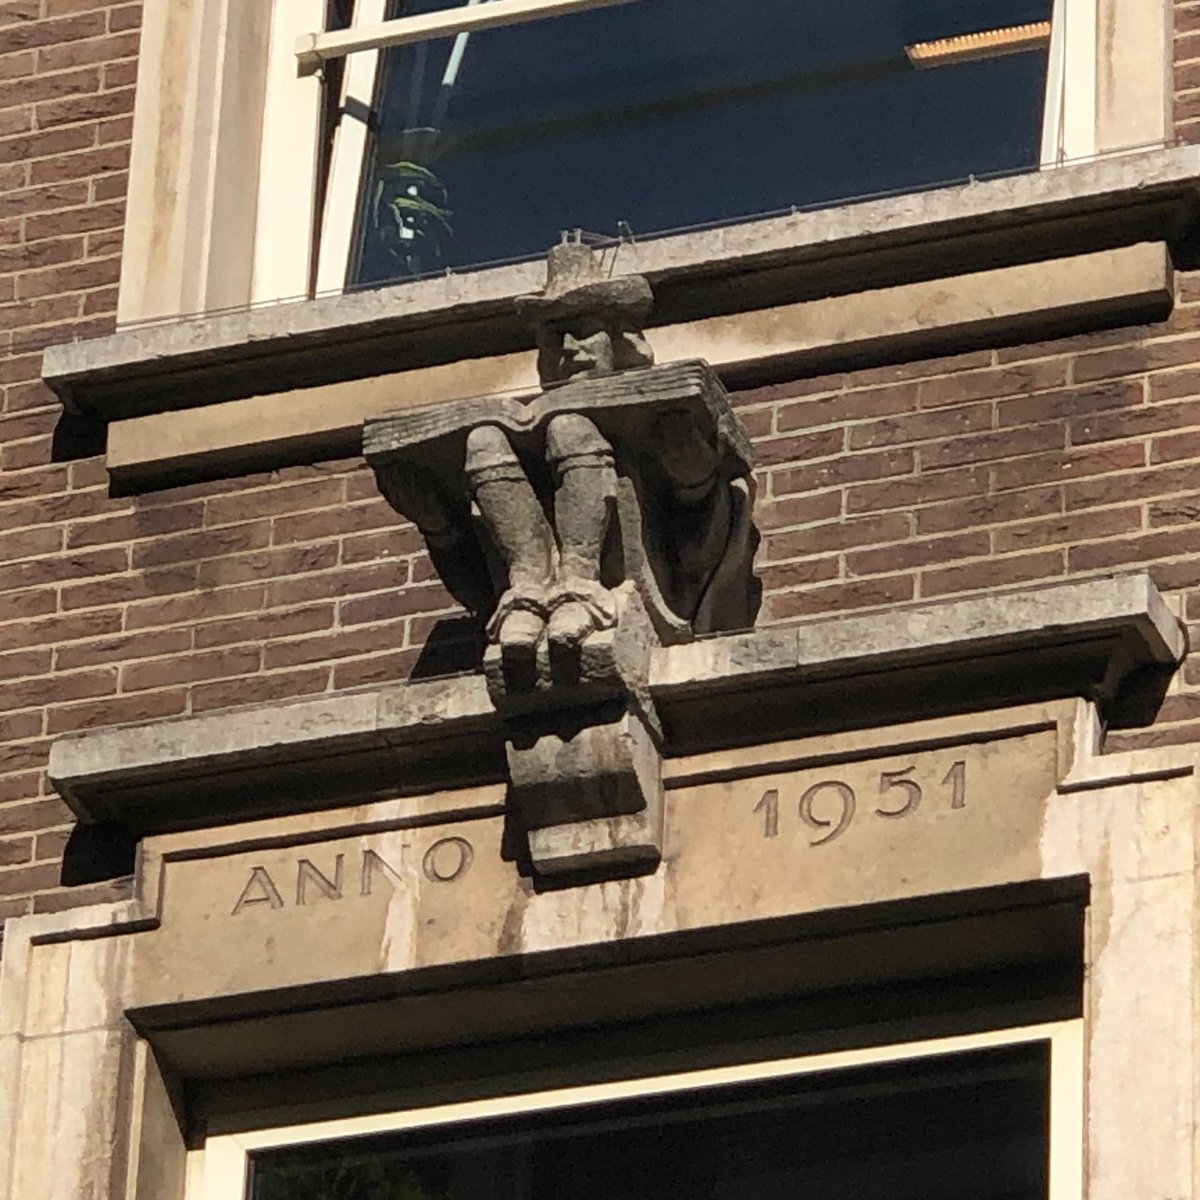 Modern gable stone of a man reading (Spuistraat, Amsterdam) #bookhistory